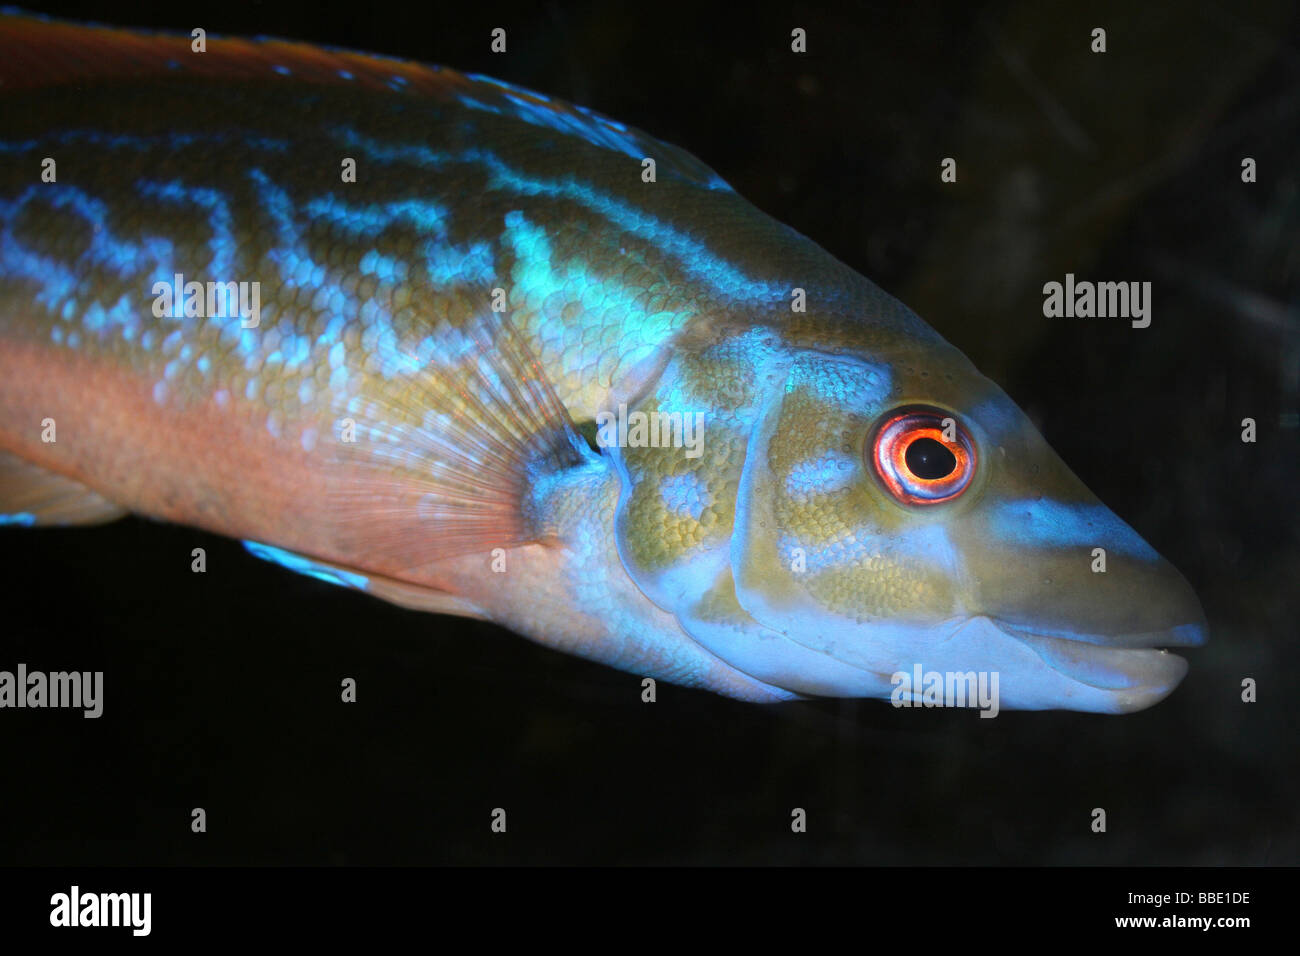 Close Up Of Head Of Male Cuckoo Wrasse Labrus mixta Facing Right Stock Photo